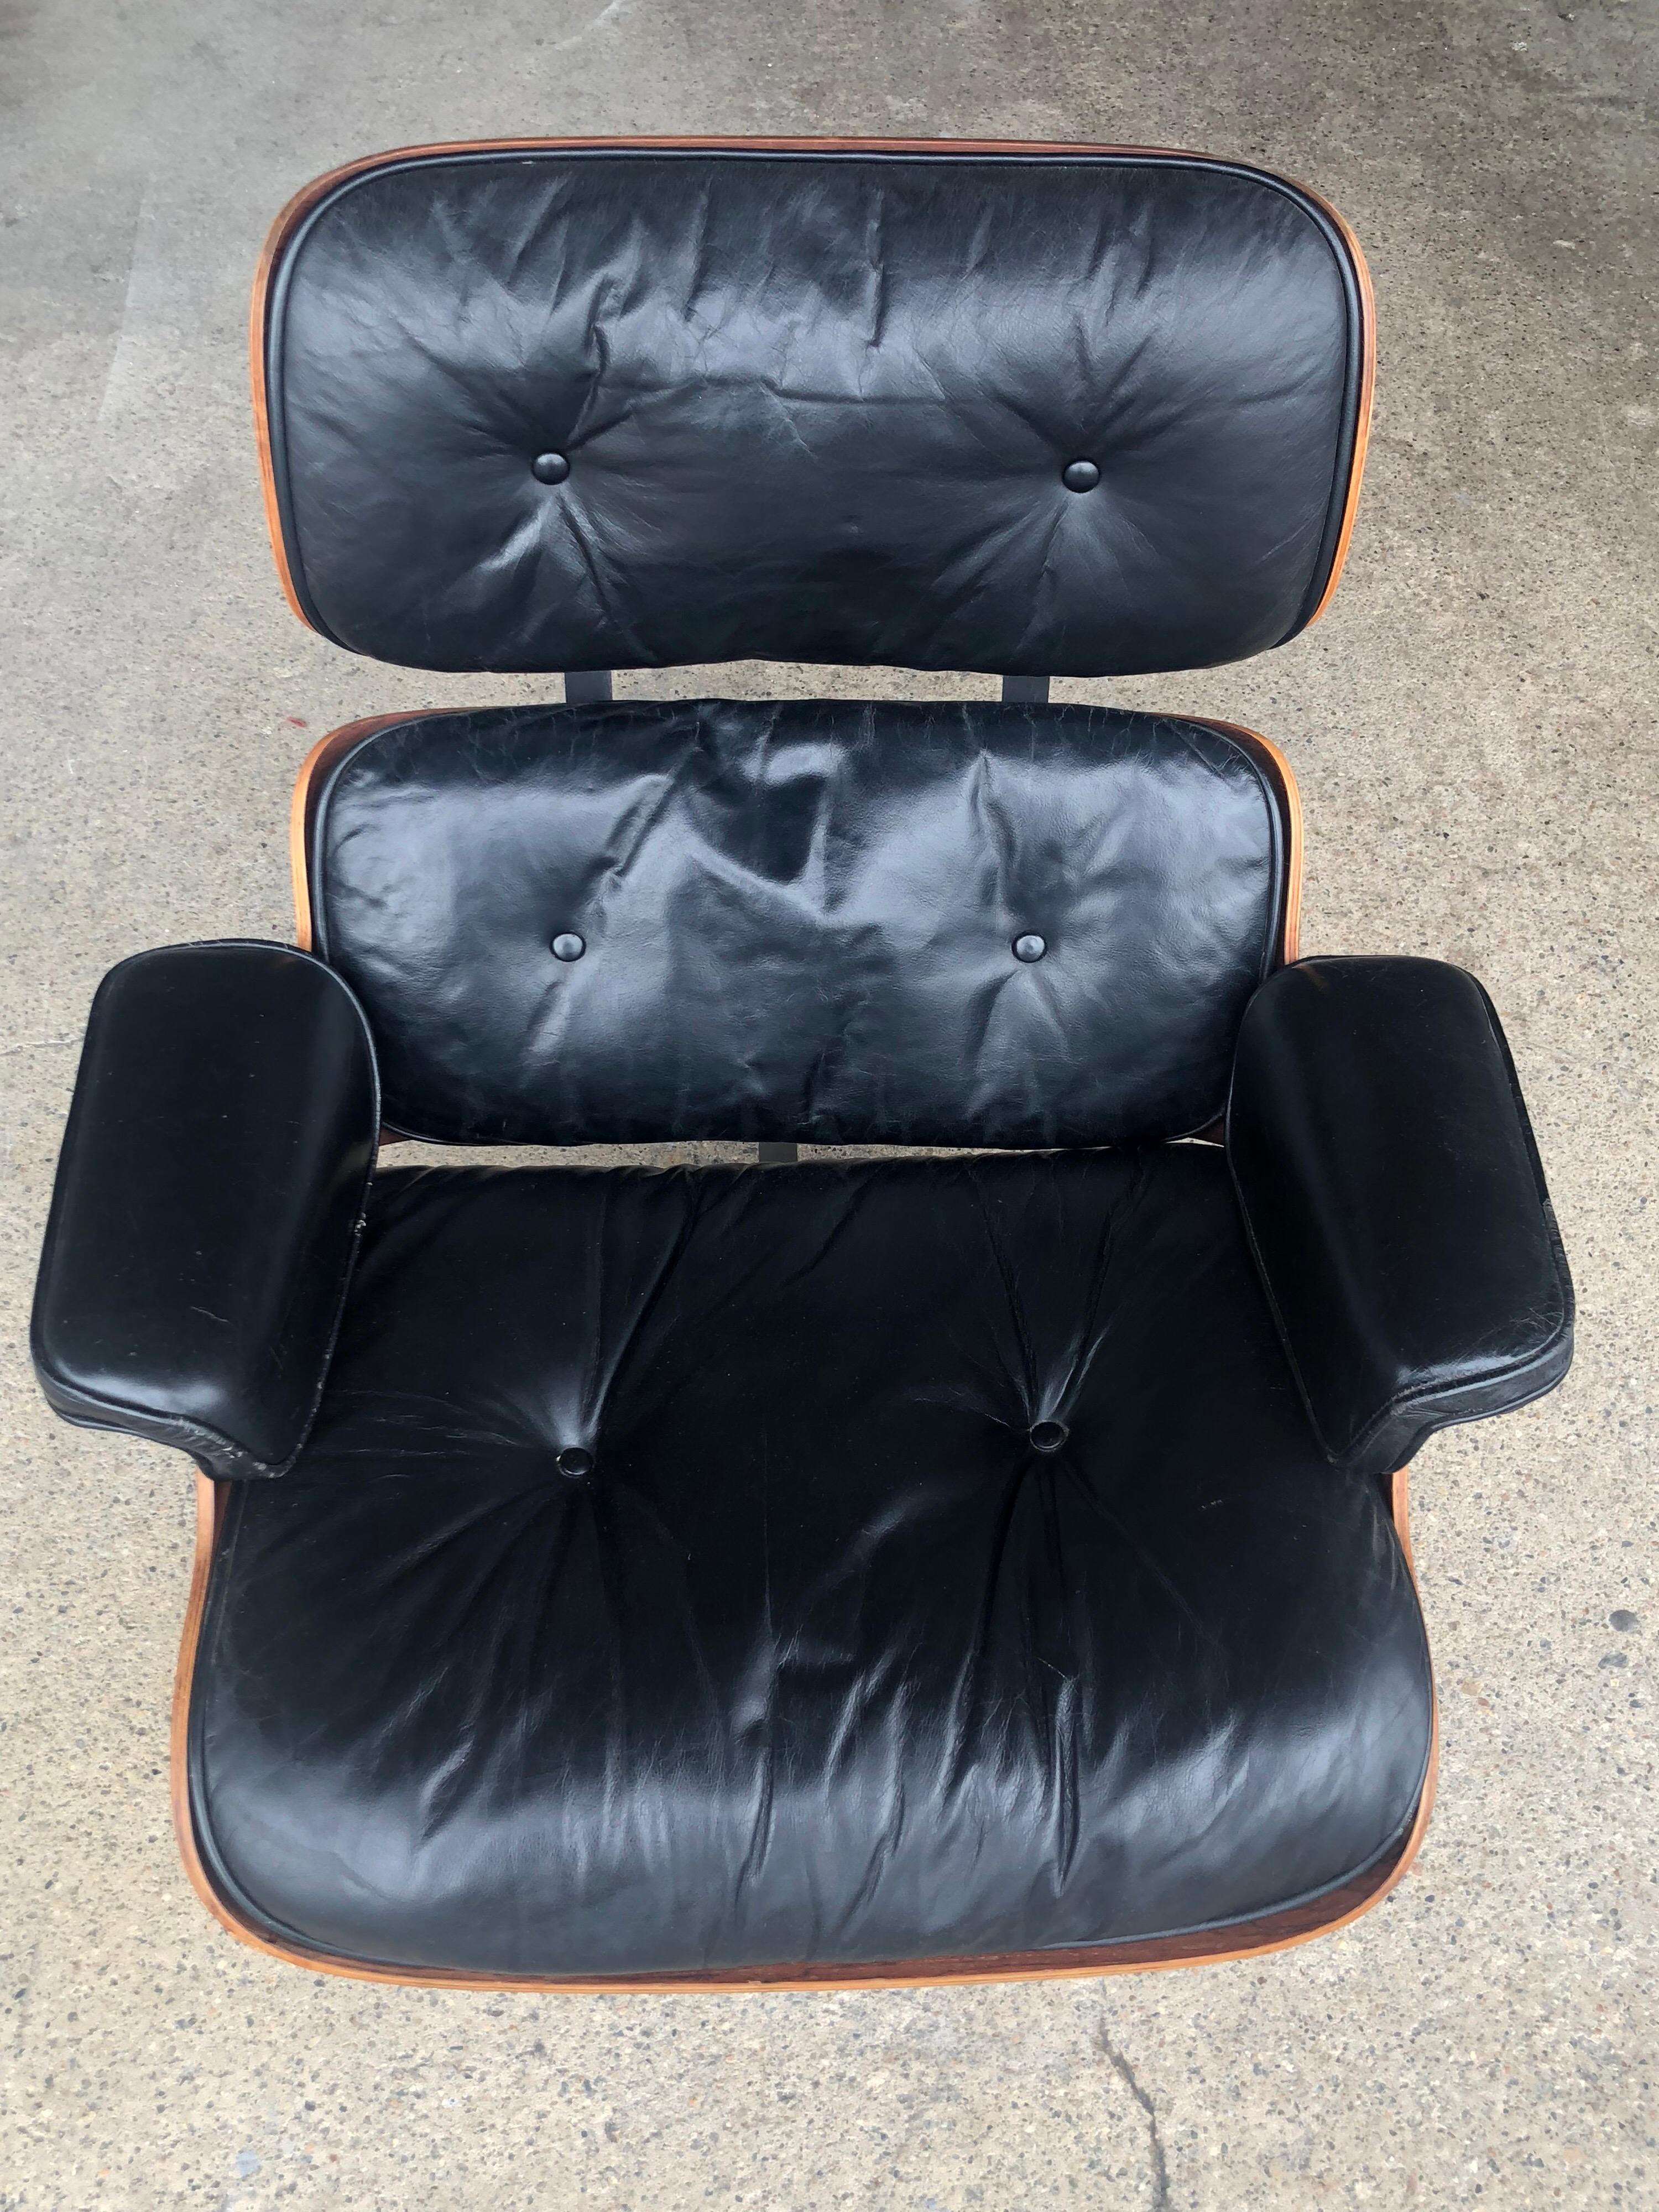 Rare 1st Year 1956 Eames Lounge with Spinning Ottoman for Herman Miller (amerikanisch)